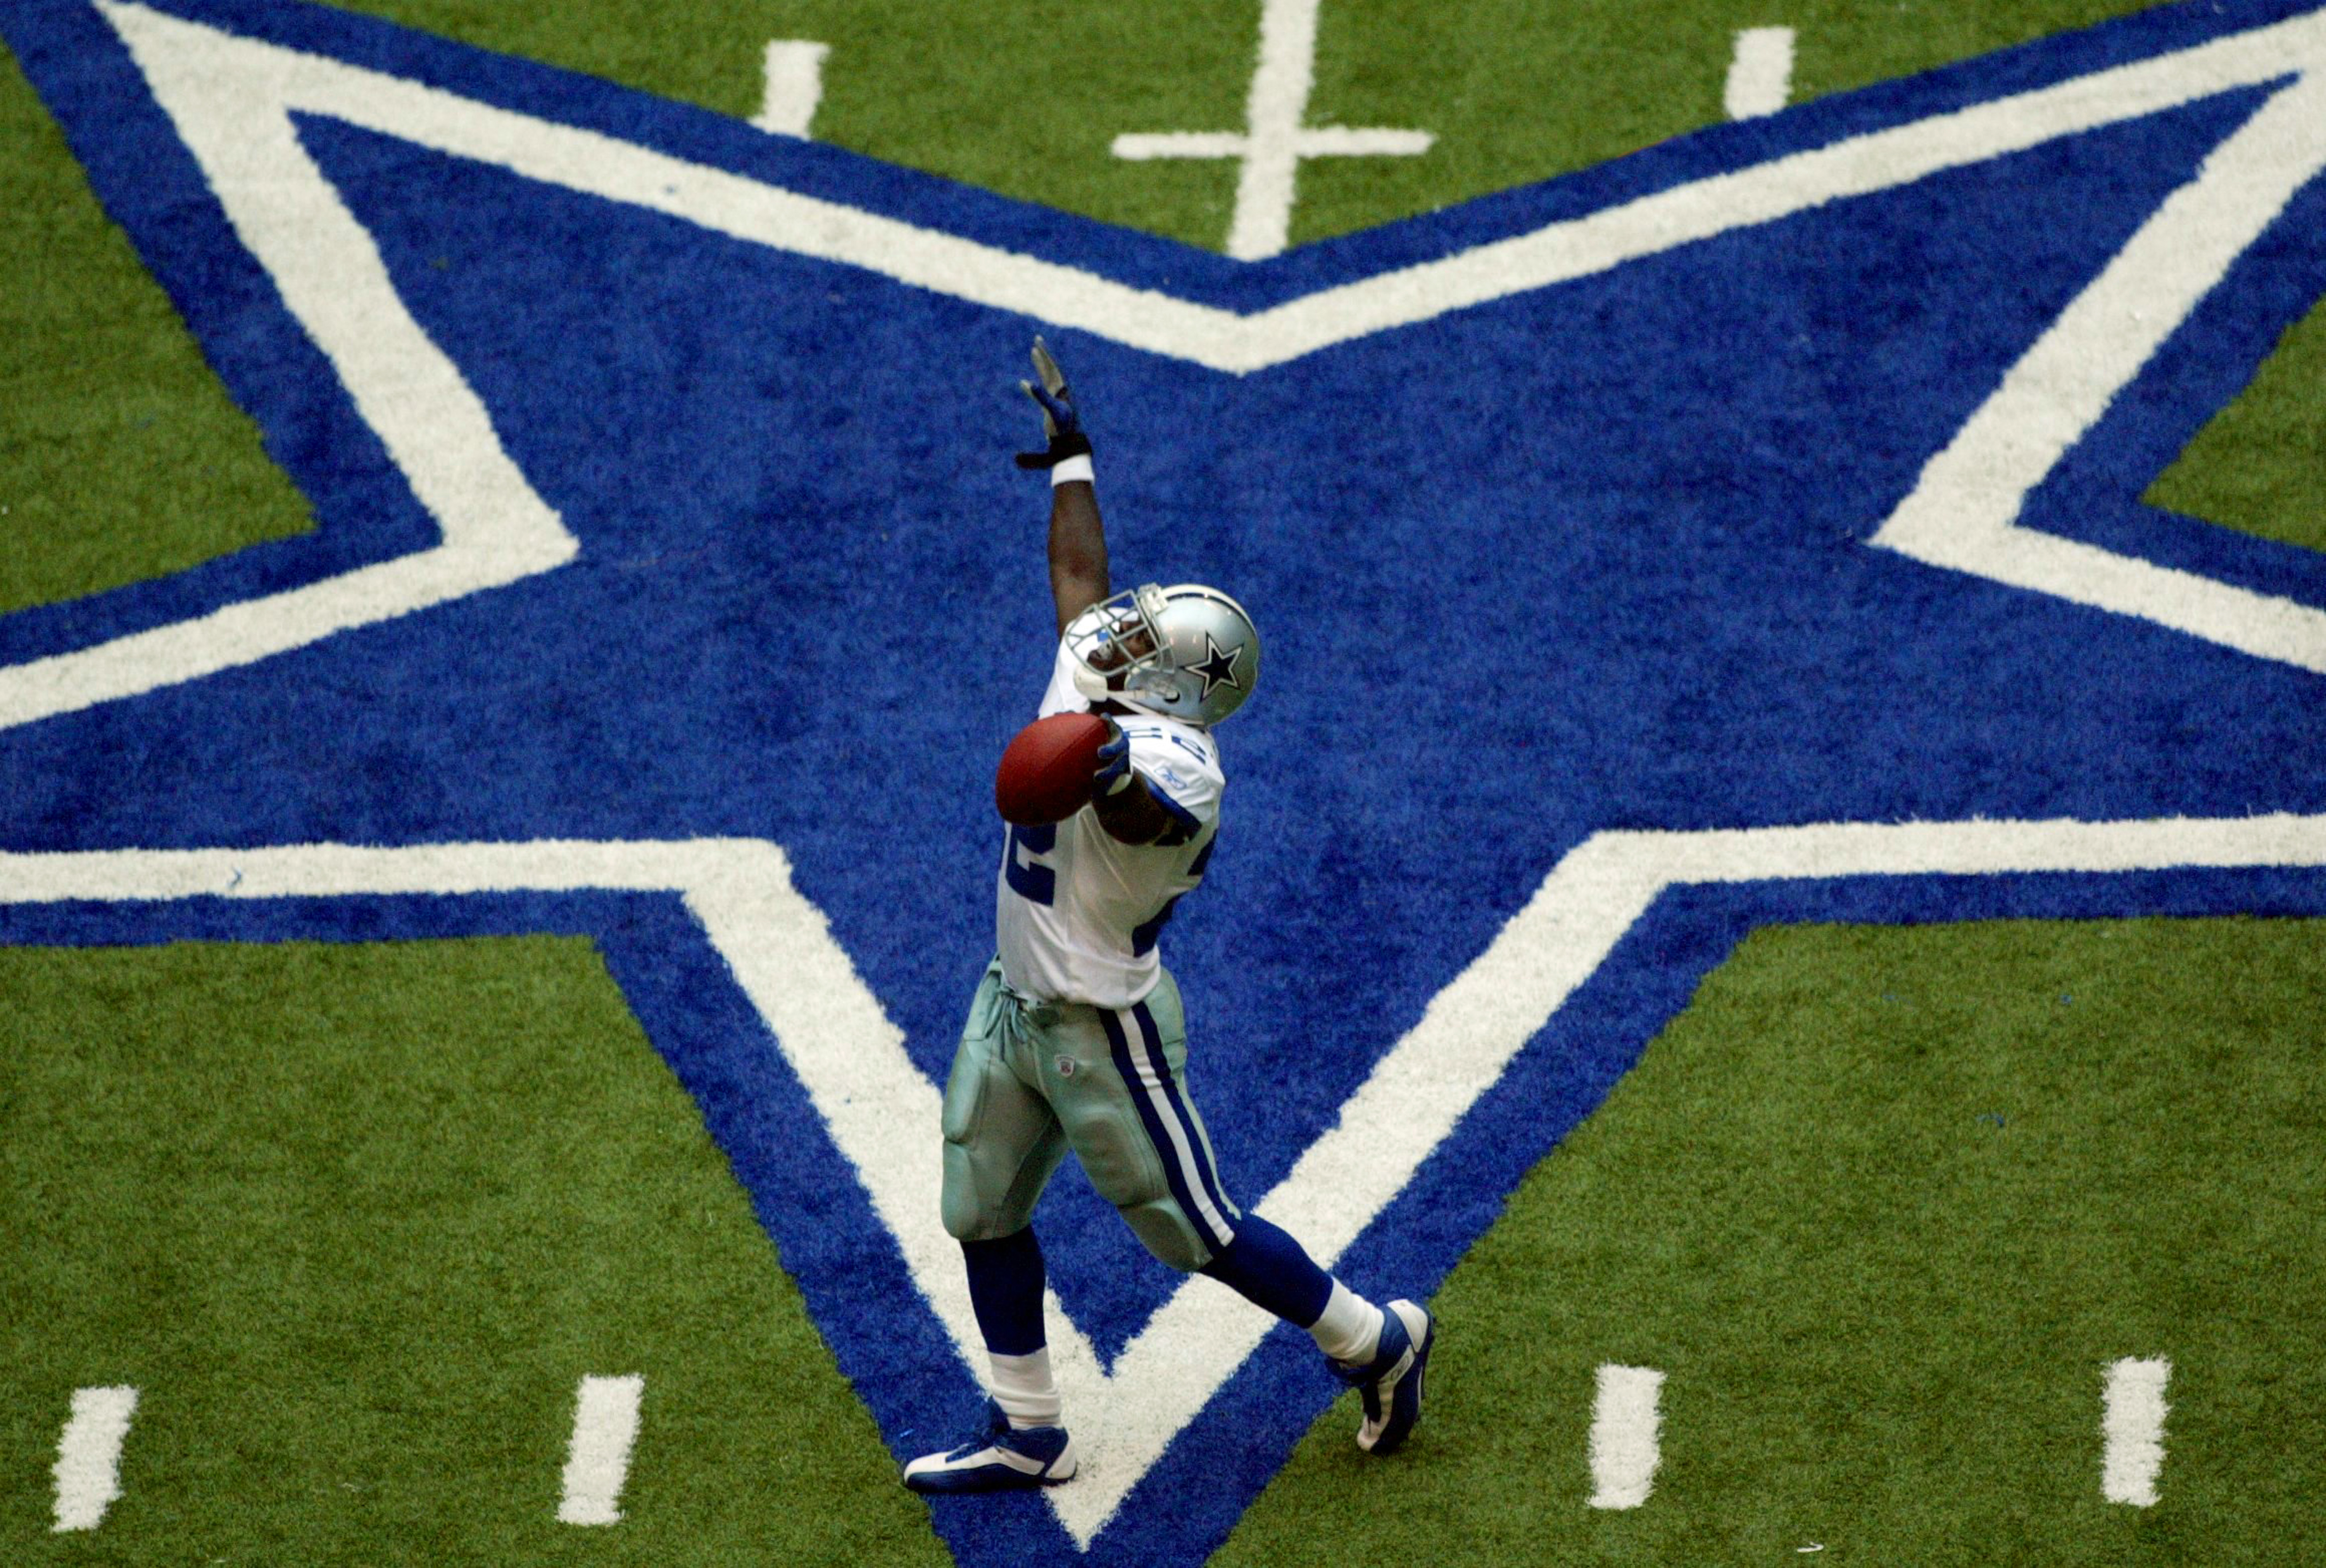 Cowboys Blog - Cowboys CTK: The Legend of 22, From Bob Hayes To Emmitt Smith 11